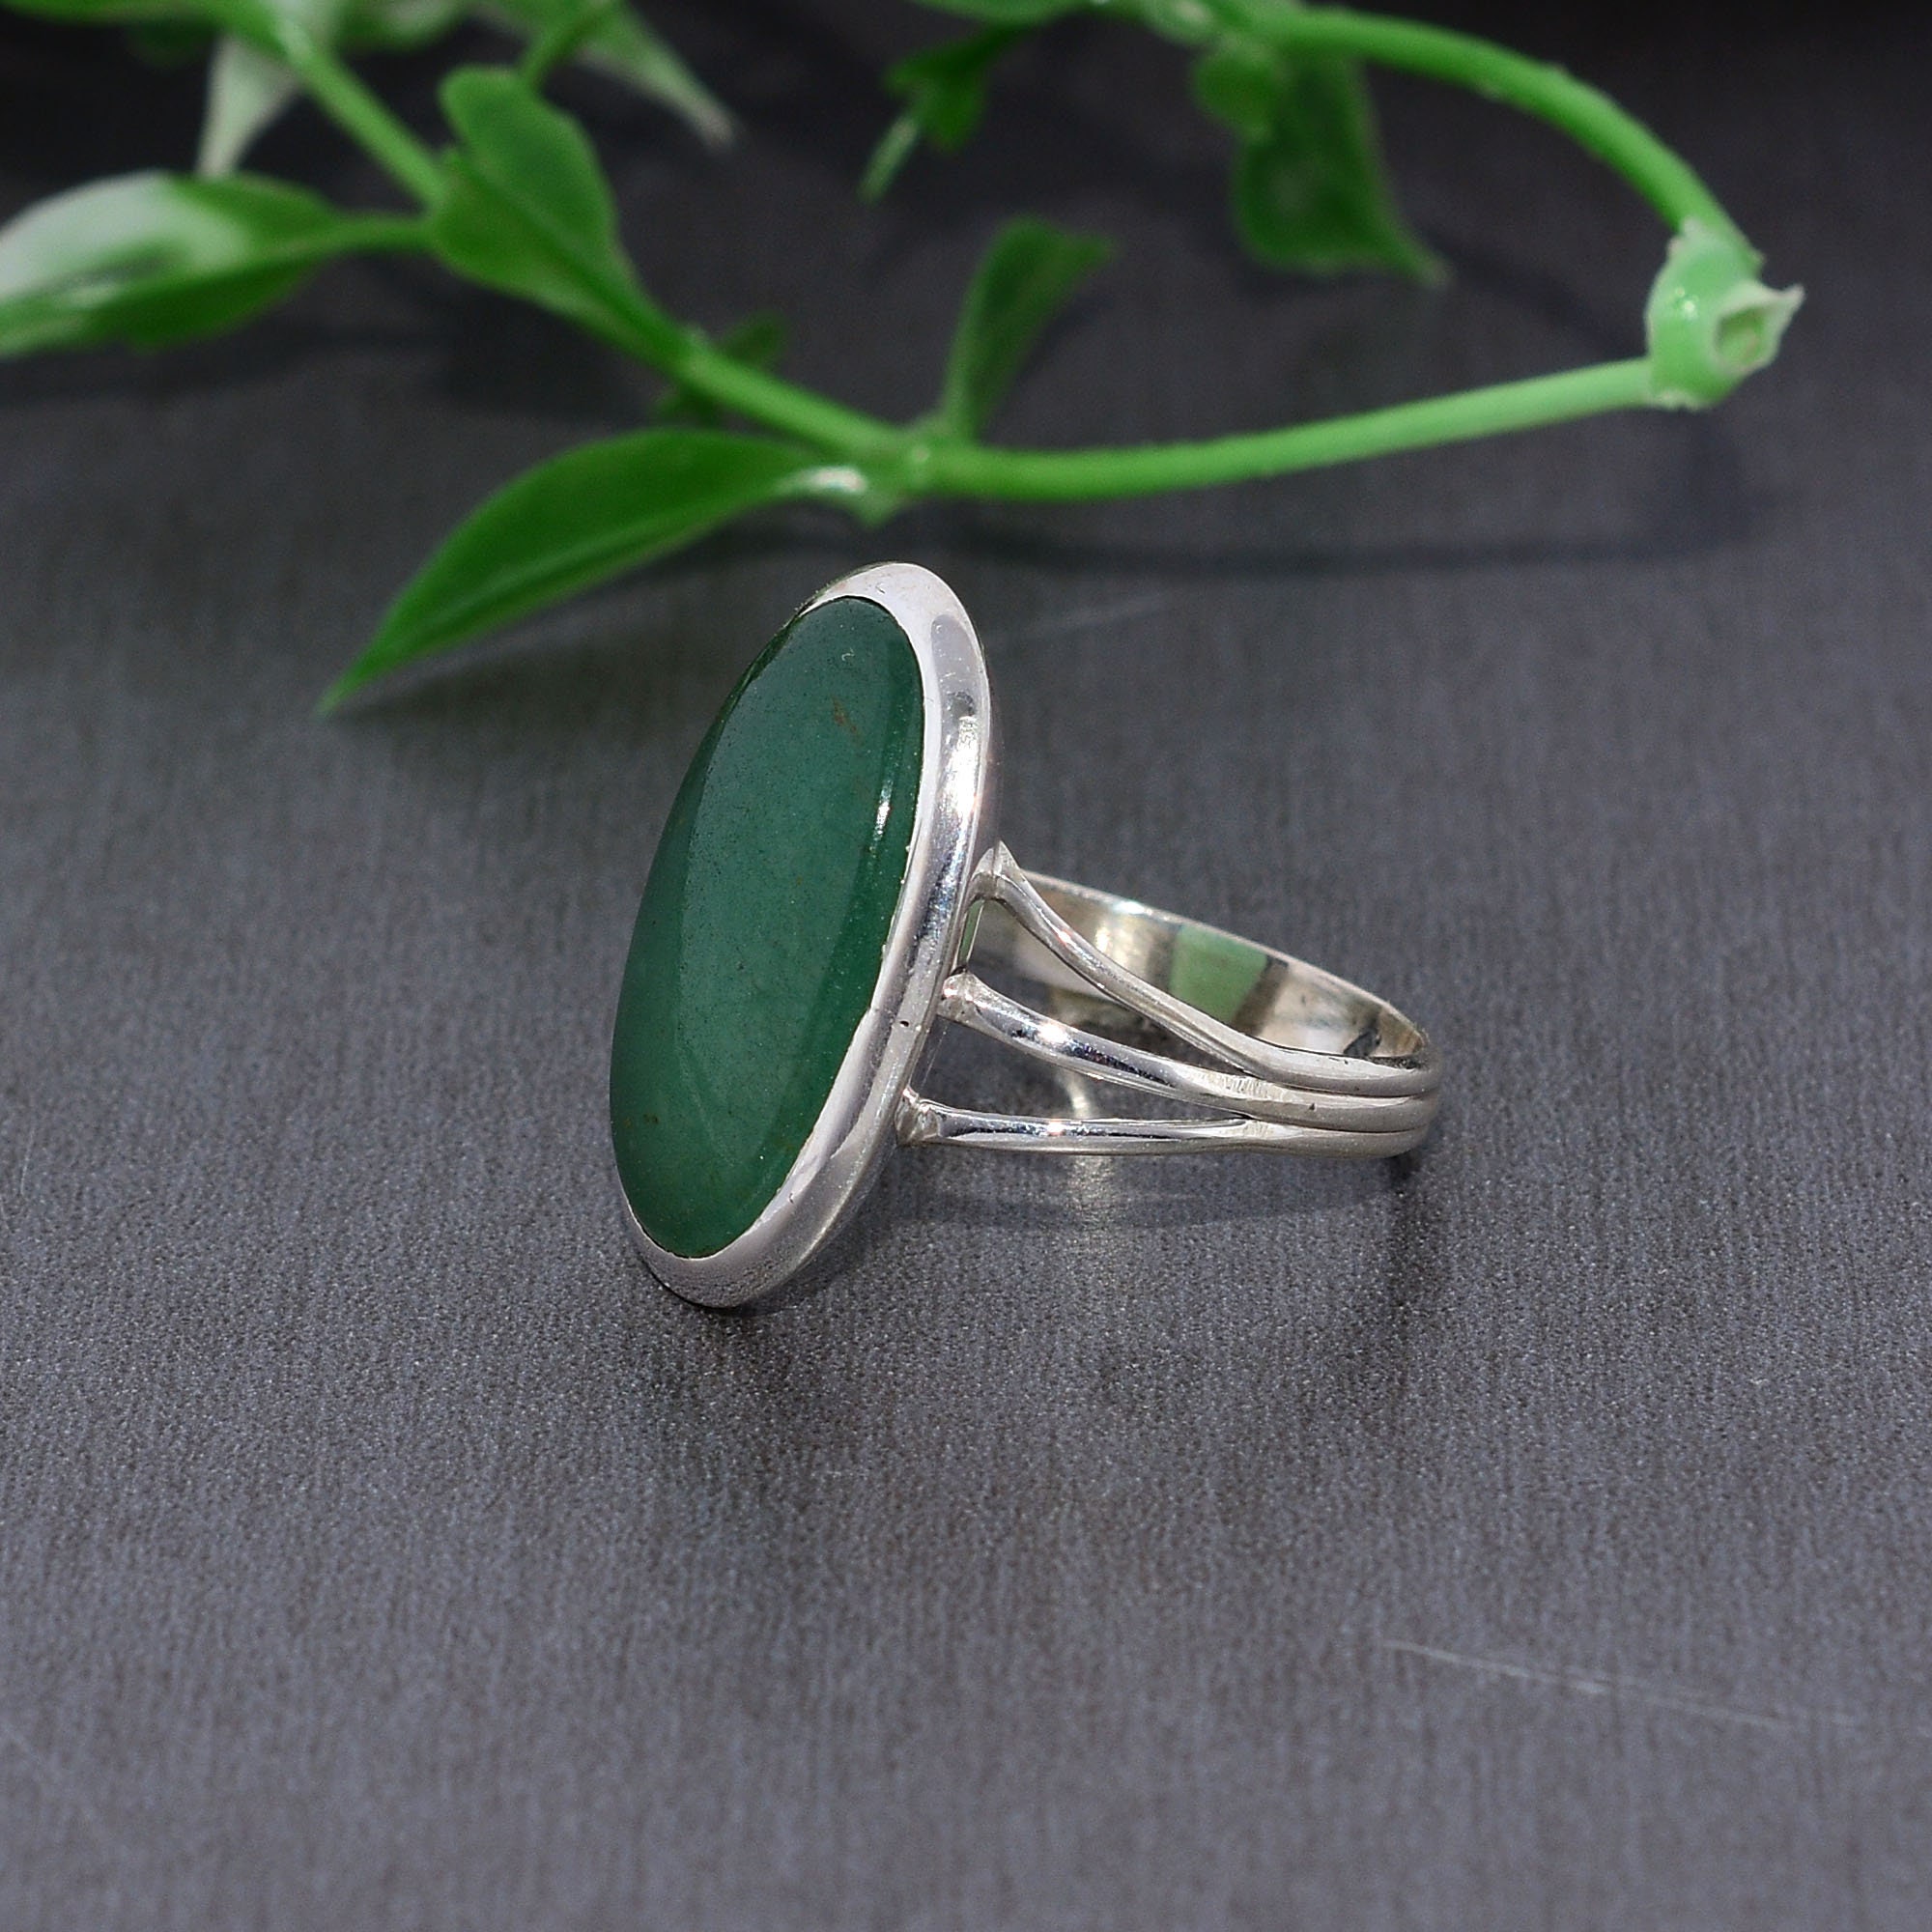 Plain Silver Mens Ring with Color Changing Mystical Topaz Stone » Anitolia